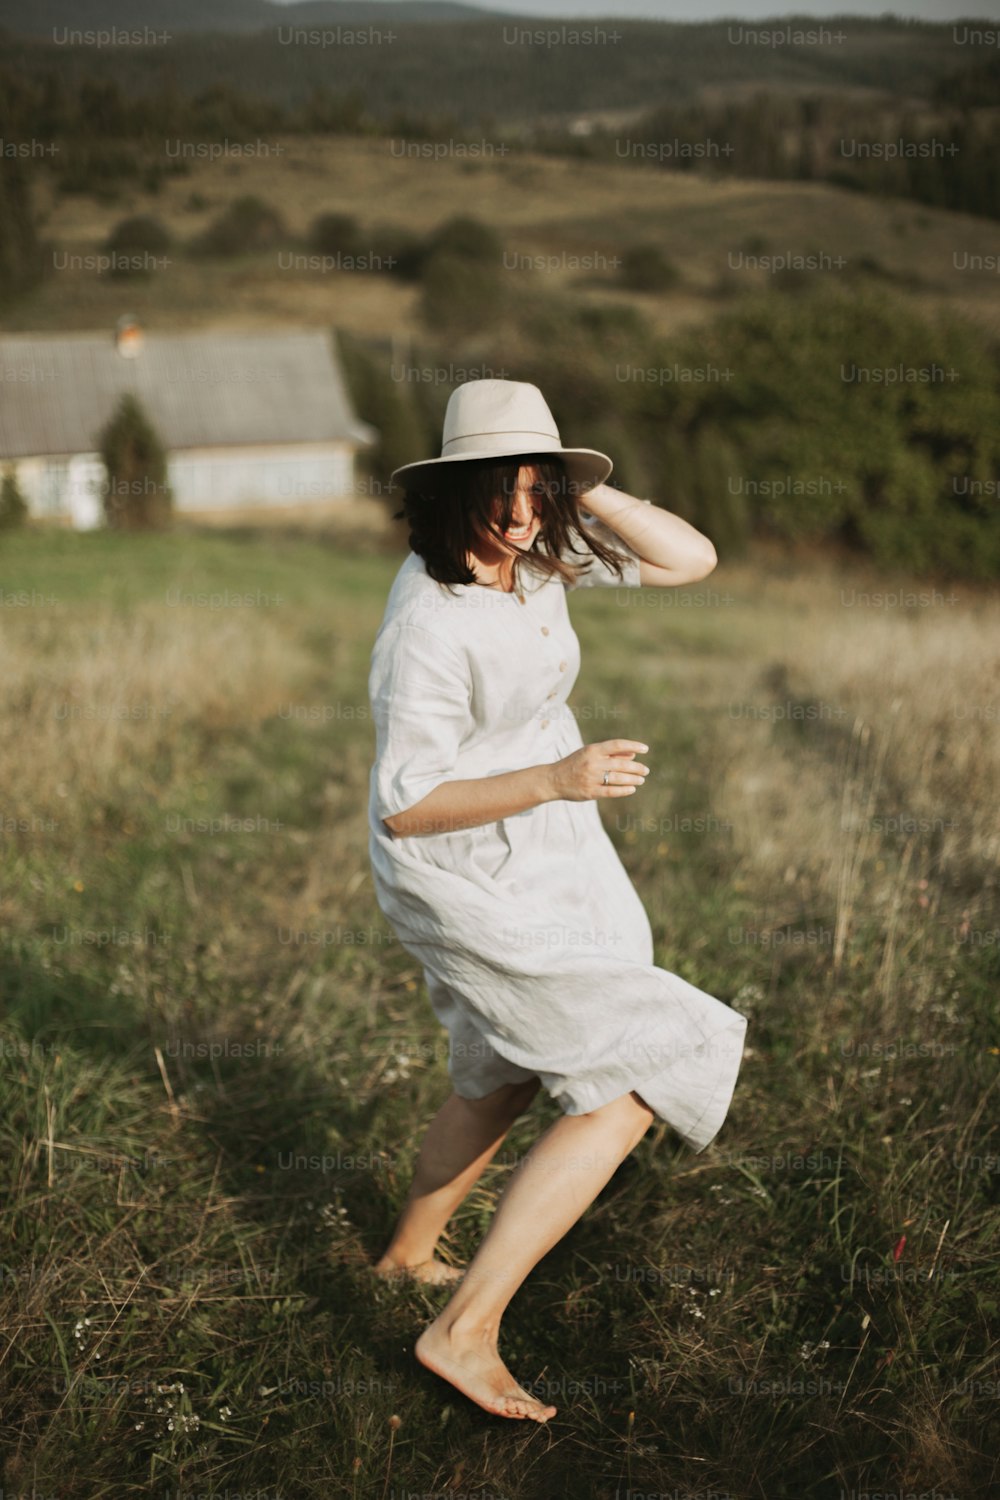 Stylish girl in linen dress running barefoot among herbs and wildflowers in sunny field in mountains. Boho woman relaxing in countryside, simple rustic life. Atmospheric image. Space text